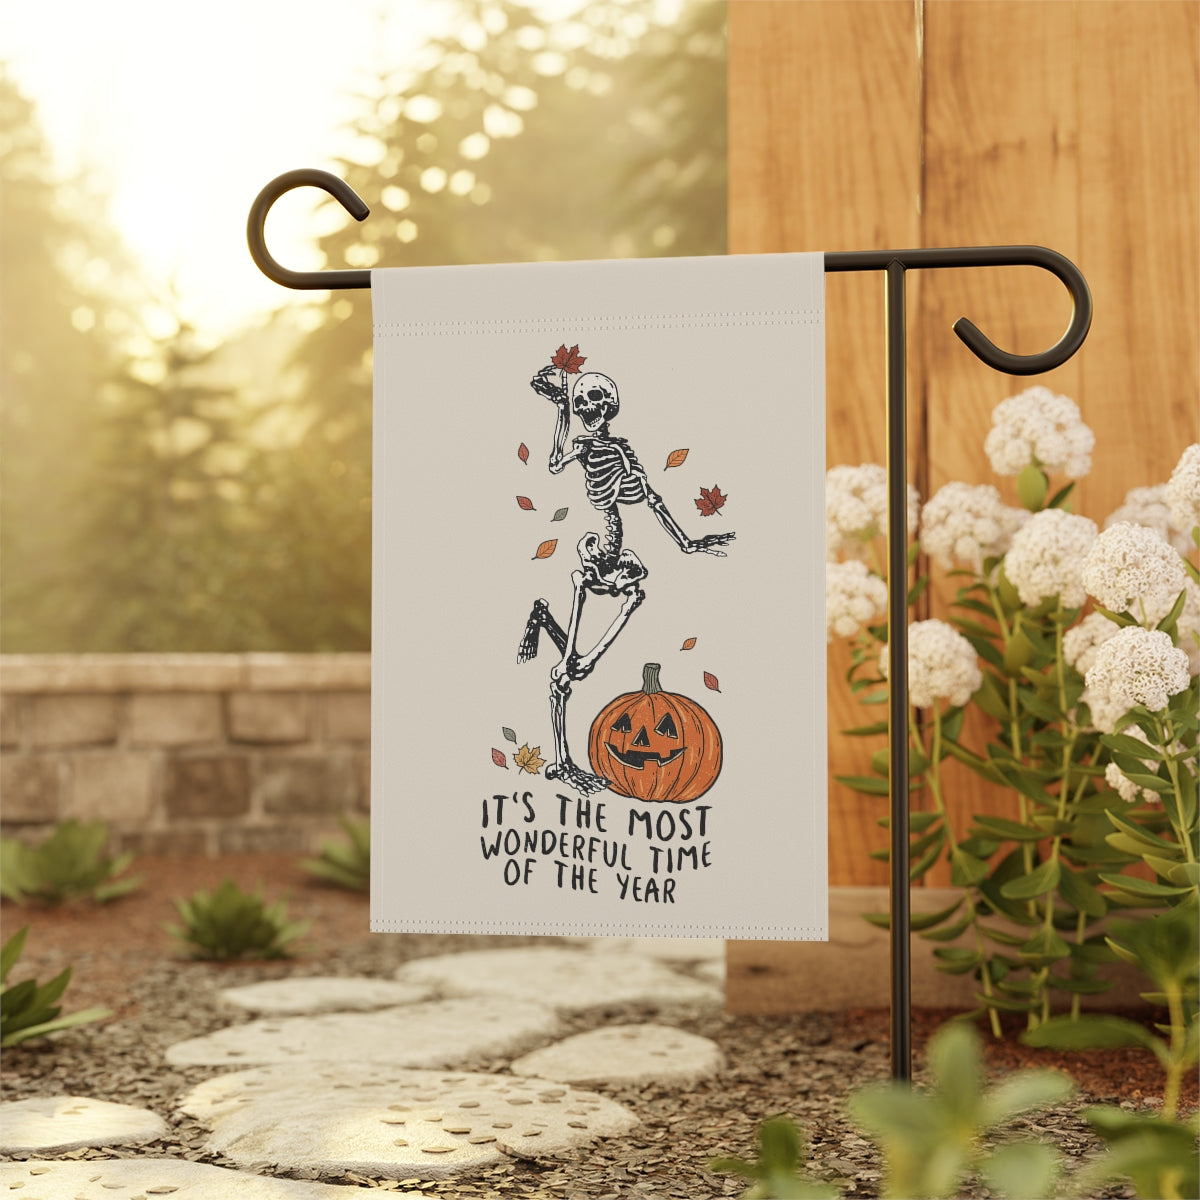 It's the Most Wonderful Time of the Year Skeleton Halloween Garden Flag